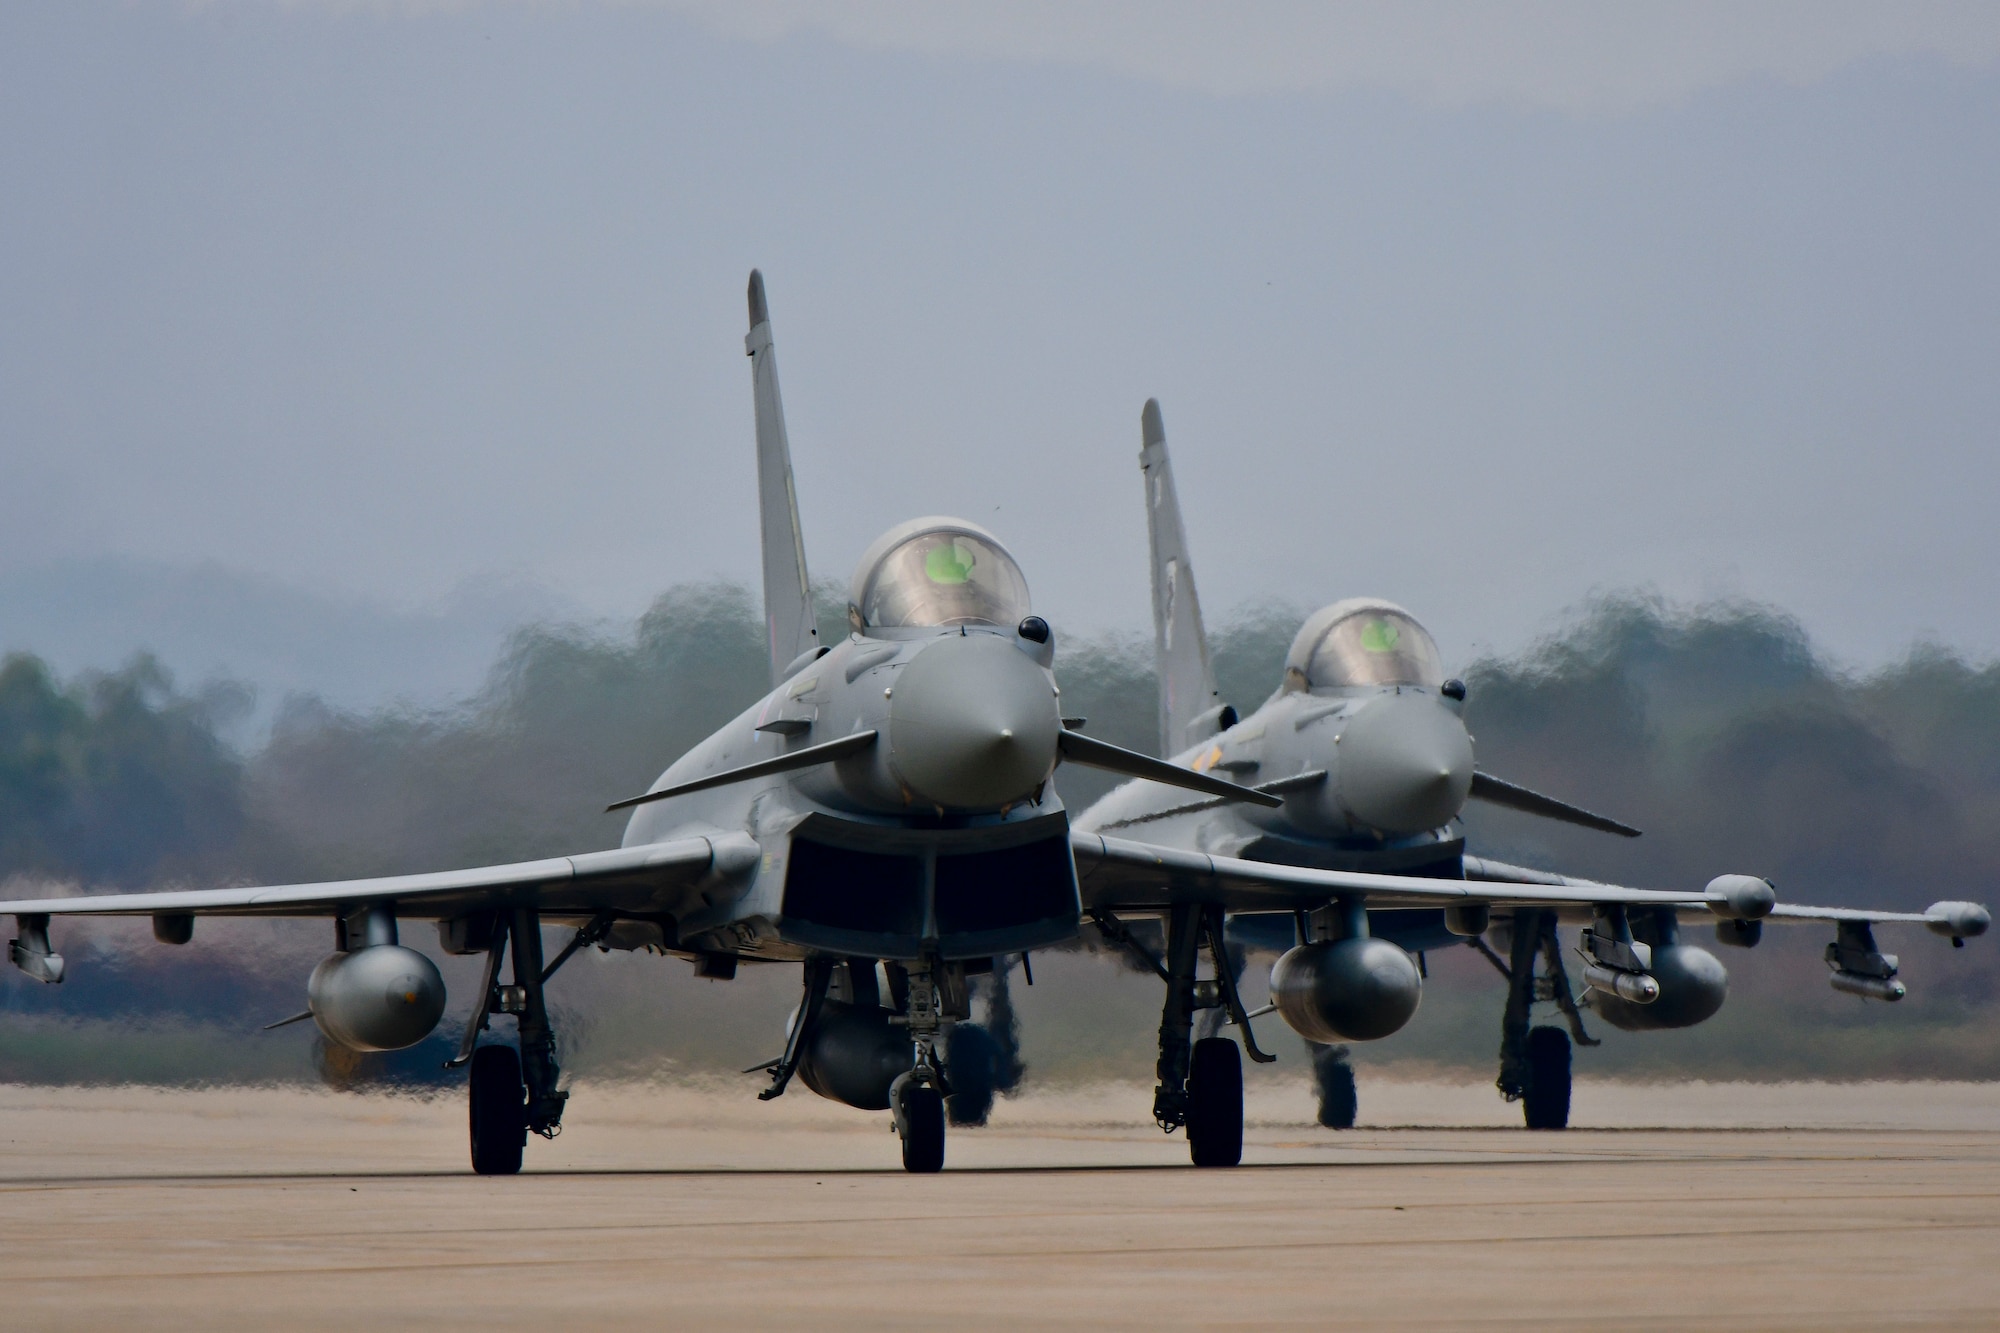 Two Royal Air Force Eurofighter Typhoon FGR4s taxi off of the runway after landing at Osan Air Base, Republic of Korea, Nov. 5, 2016. The arrival of the Typhoons marks the first time the RAF has fielded aircraft on the Korean Peninsula since 1956. (U.S. Air Force photo by Senior Airman Victor J. Caputo)